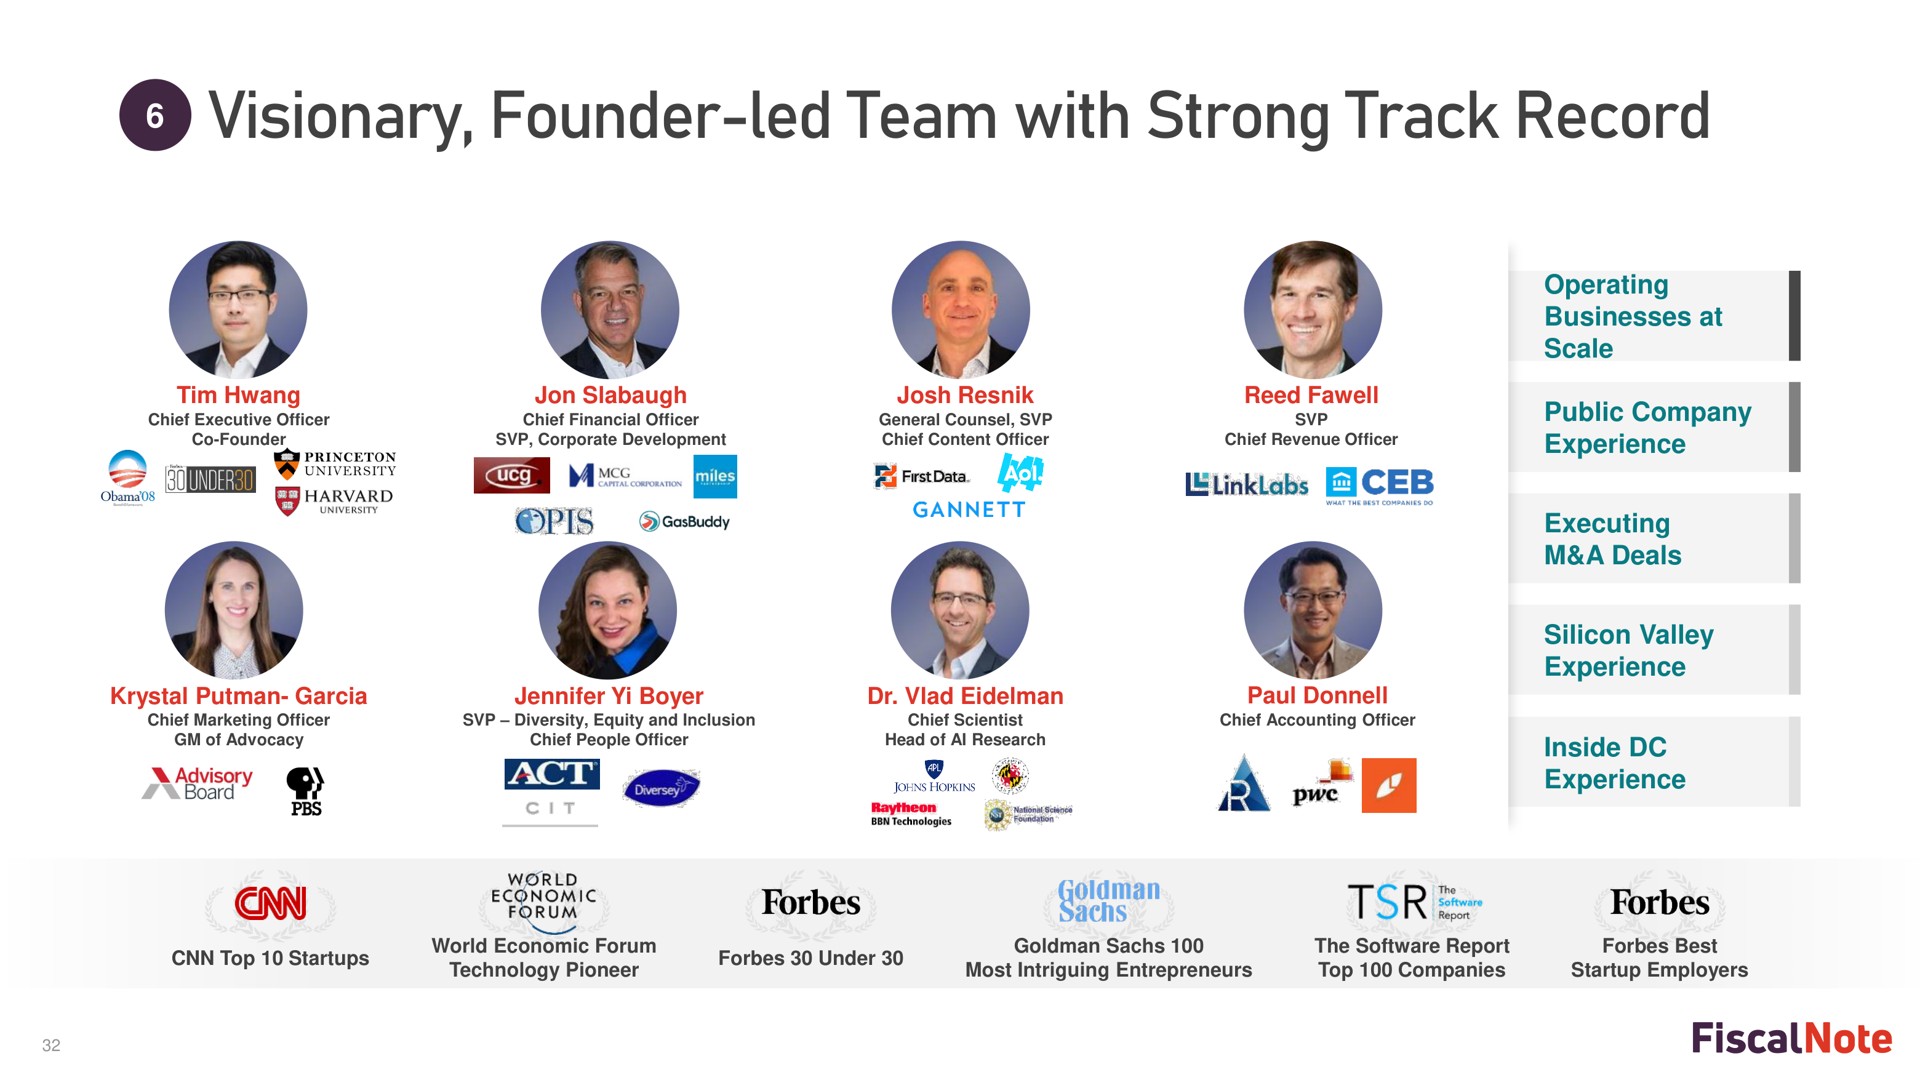 visionary founder led team with strong track record | FiscalNote